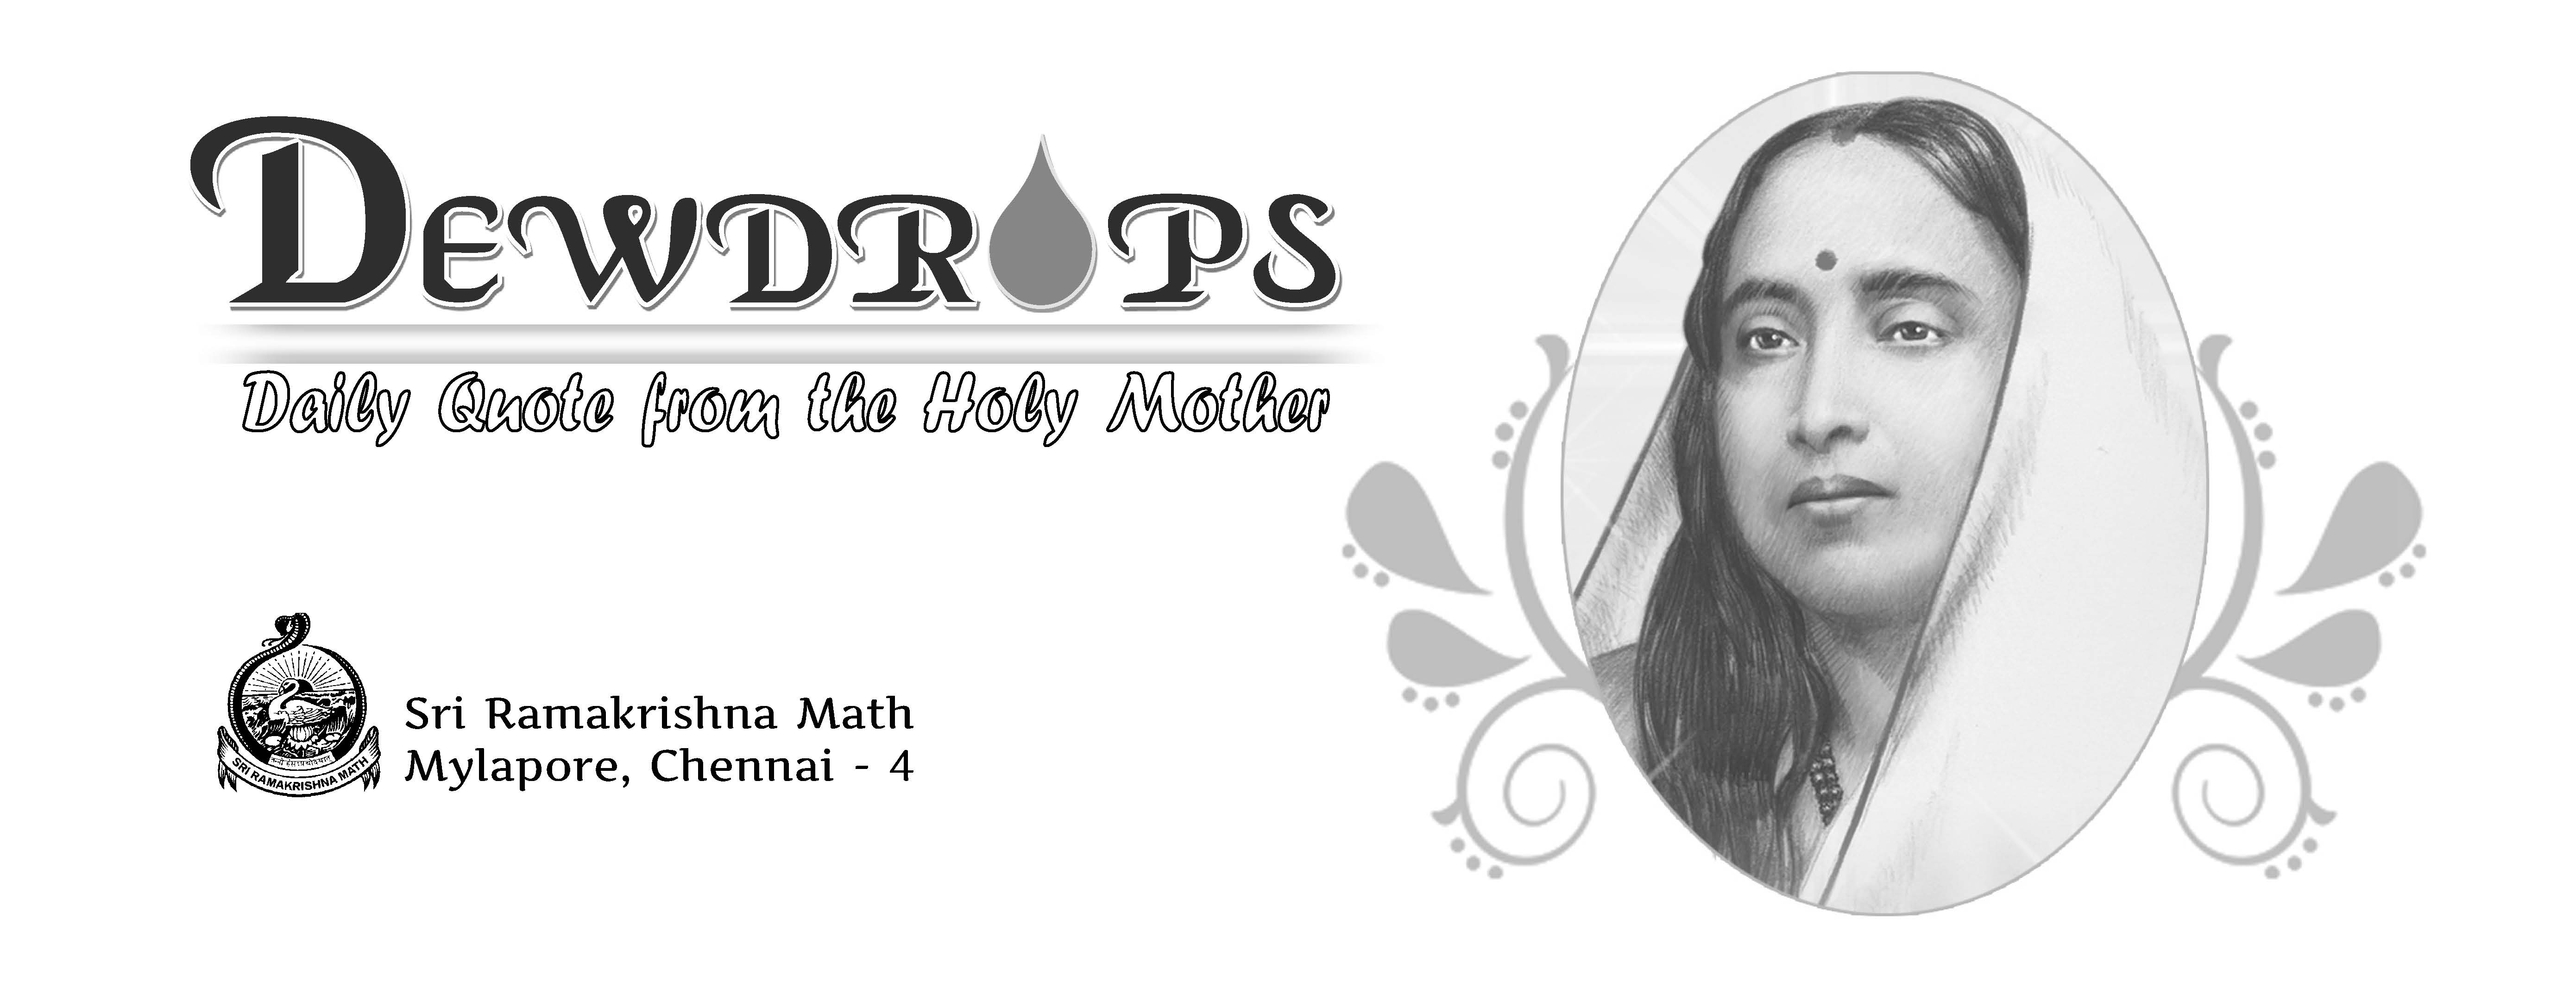 Dewdrops - Daily Quote from the Holy Mother